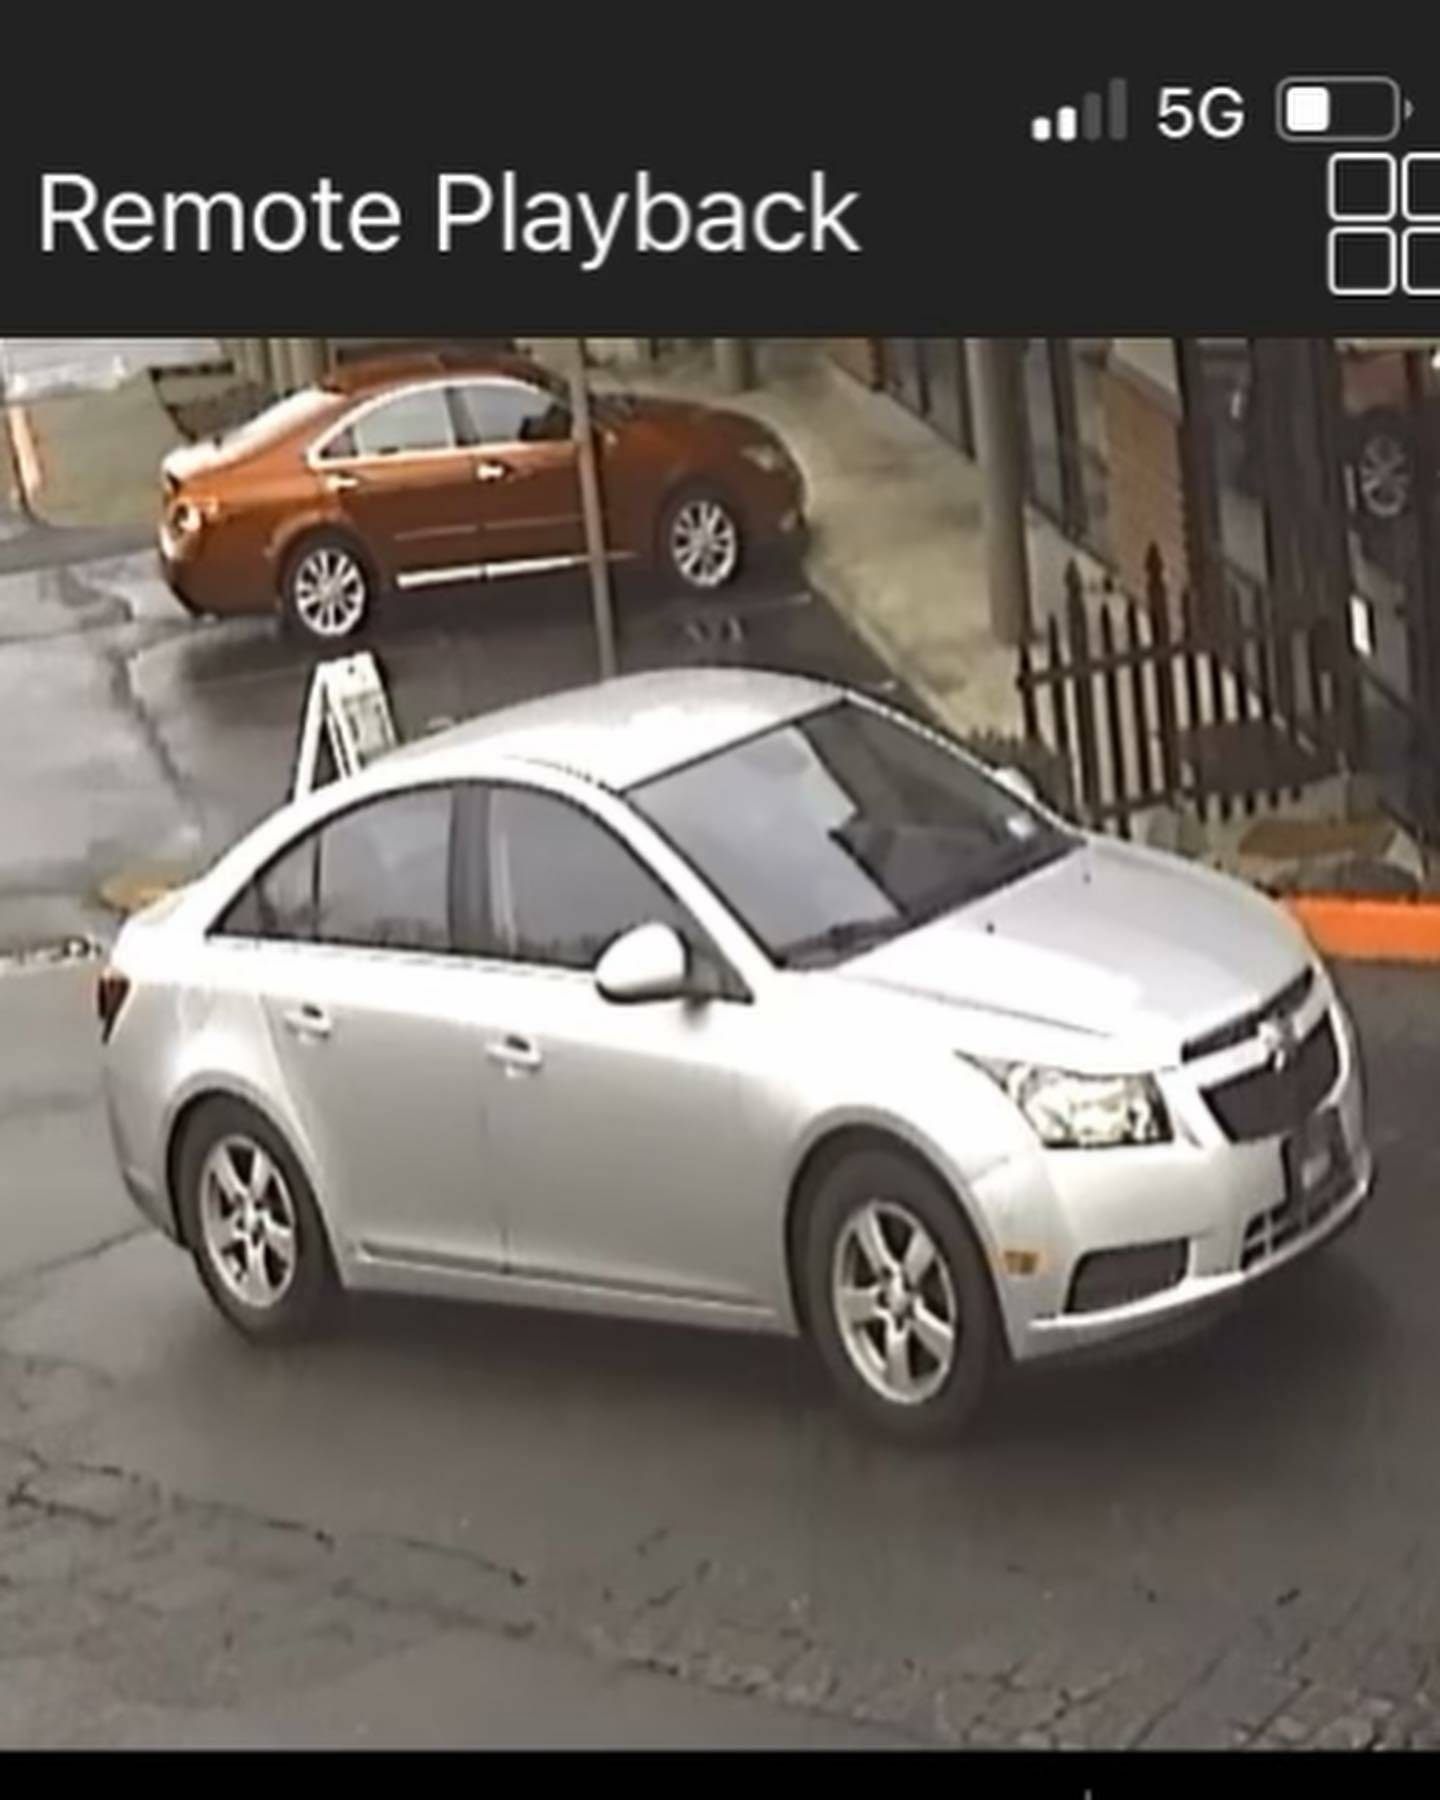 Surveillance footage shows the suspect vehicle involved in the vandalism incident, which Renton Police is pursuing as a potential hate crime. Photo courtesy of The Brewmaster’s Taproom.